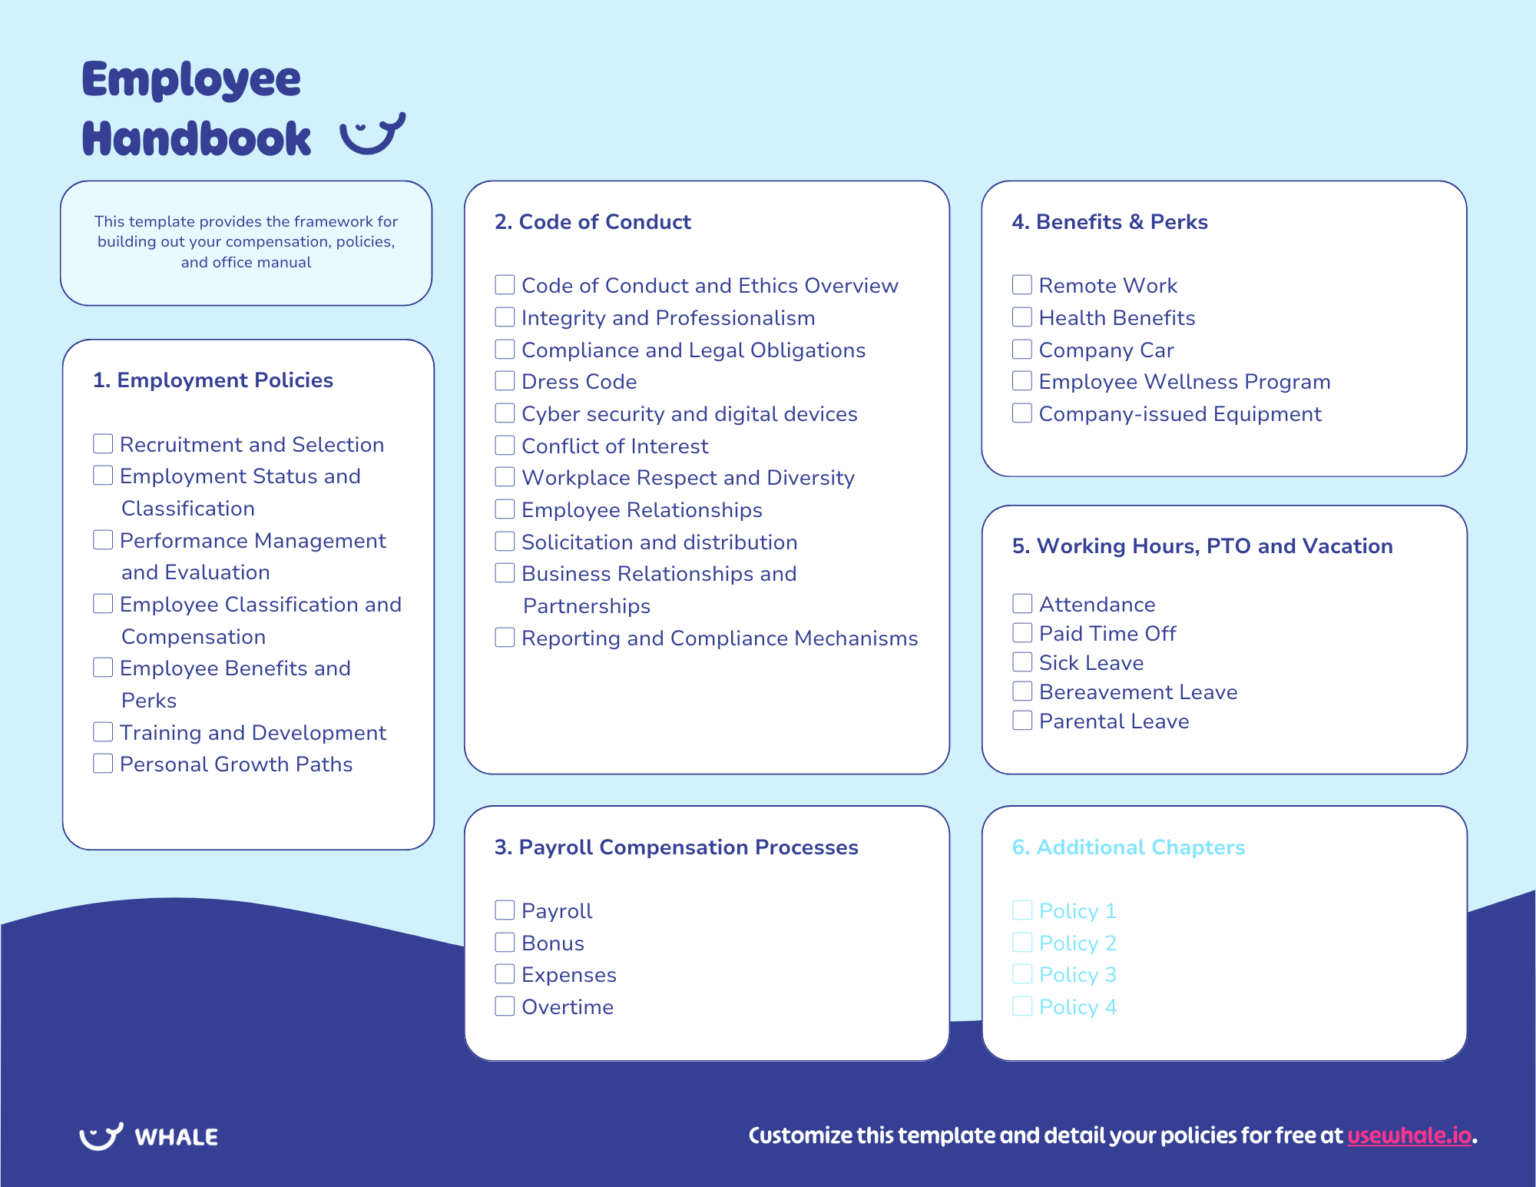 Infographic of an employee handbook template detailing various company policies and benefits